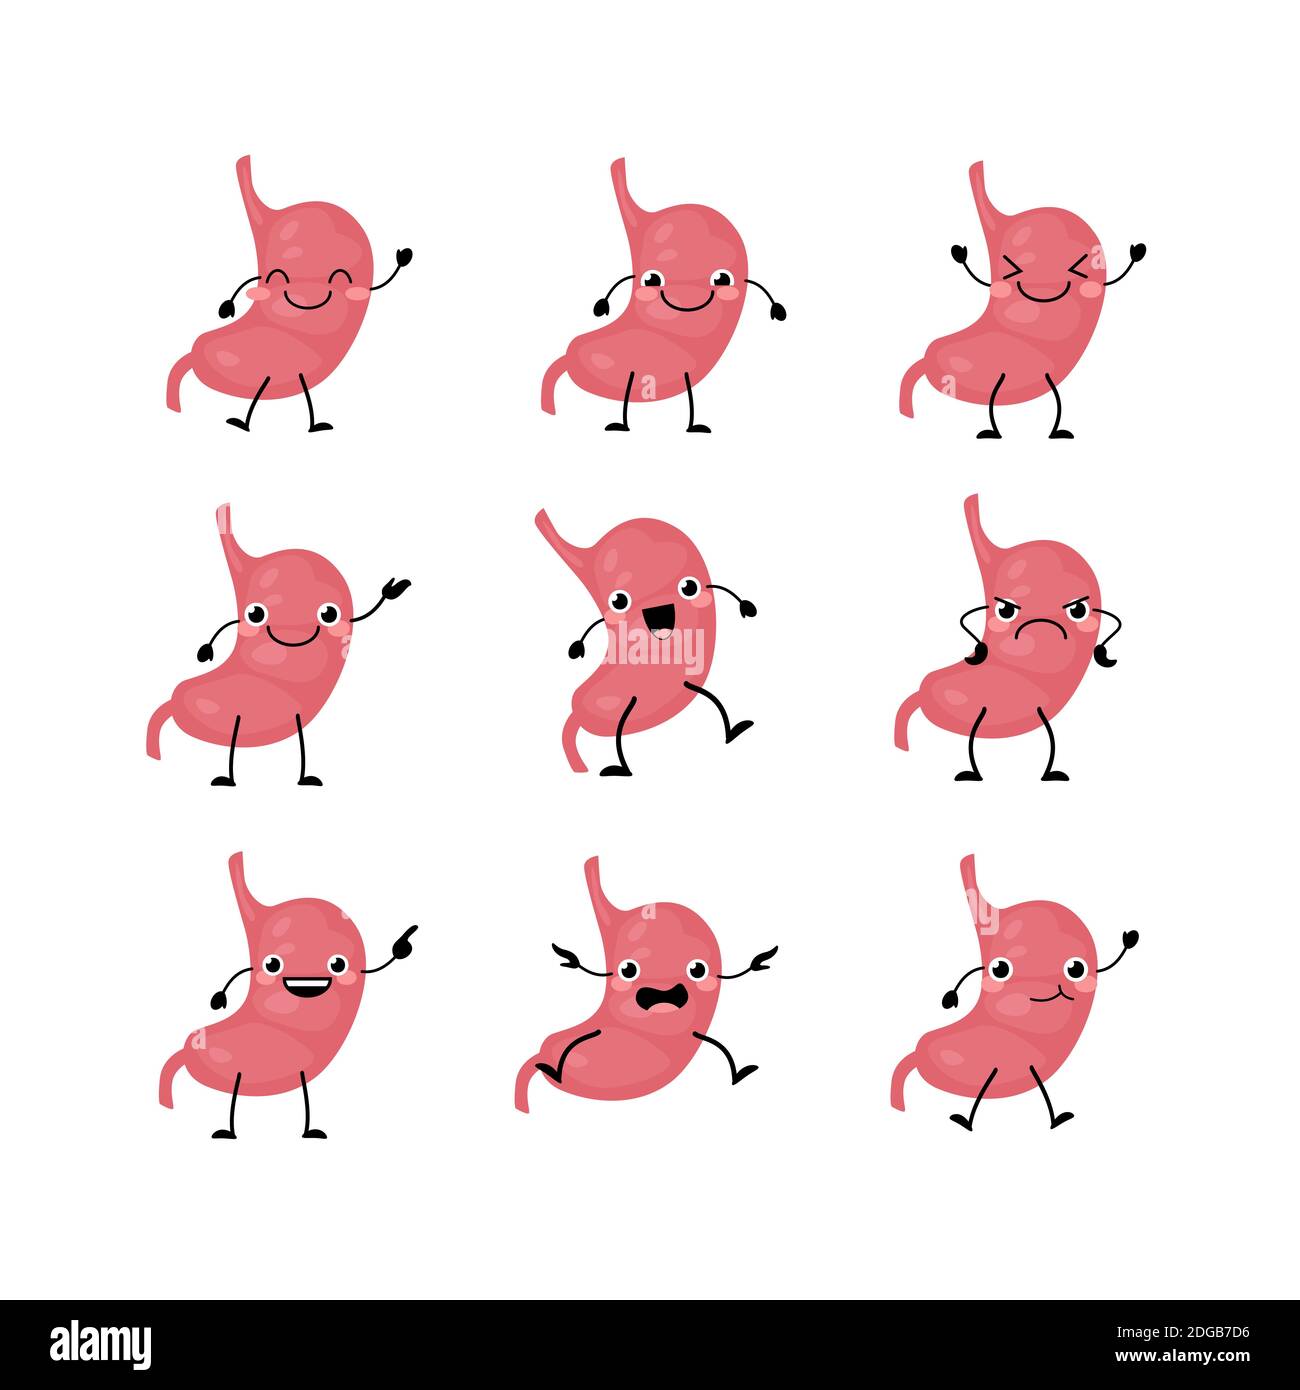 Cute stomach organs character set in a flat cartoon style. Stock Vector